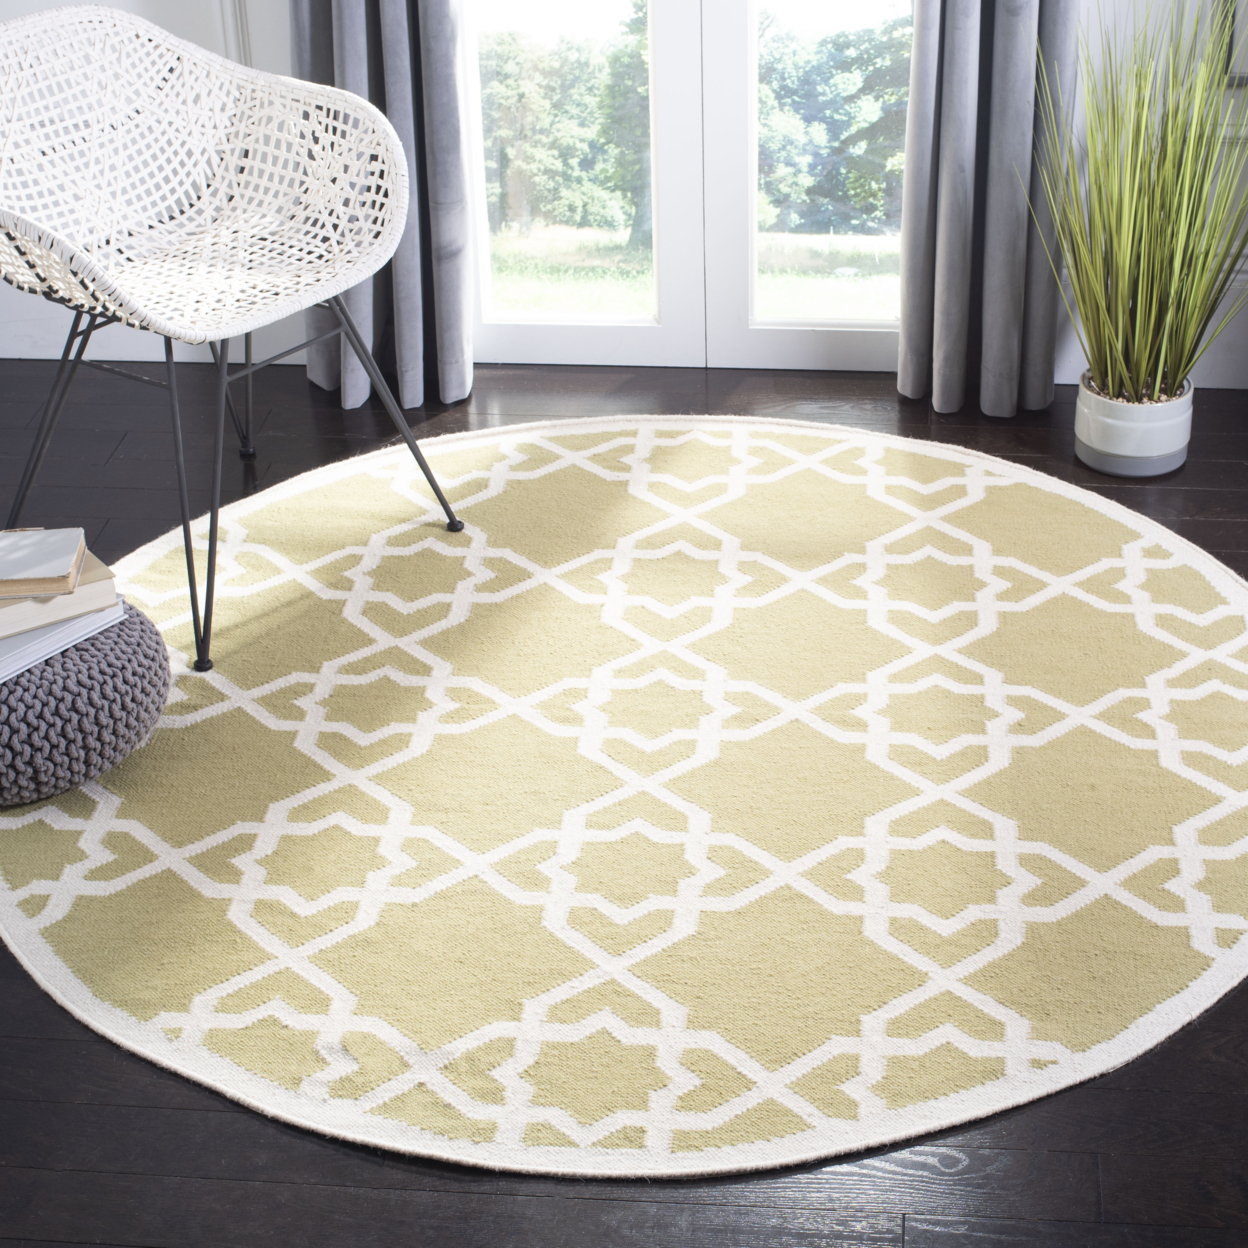 SAFAVIEH Dhurries DHU548A Handwoven Olive / Ivory Rug - 5' X 8'